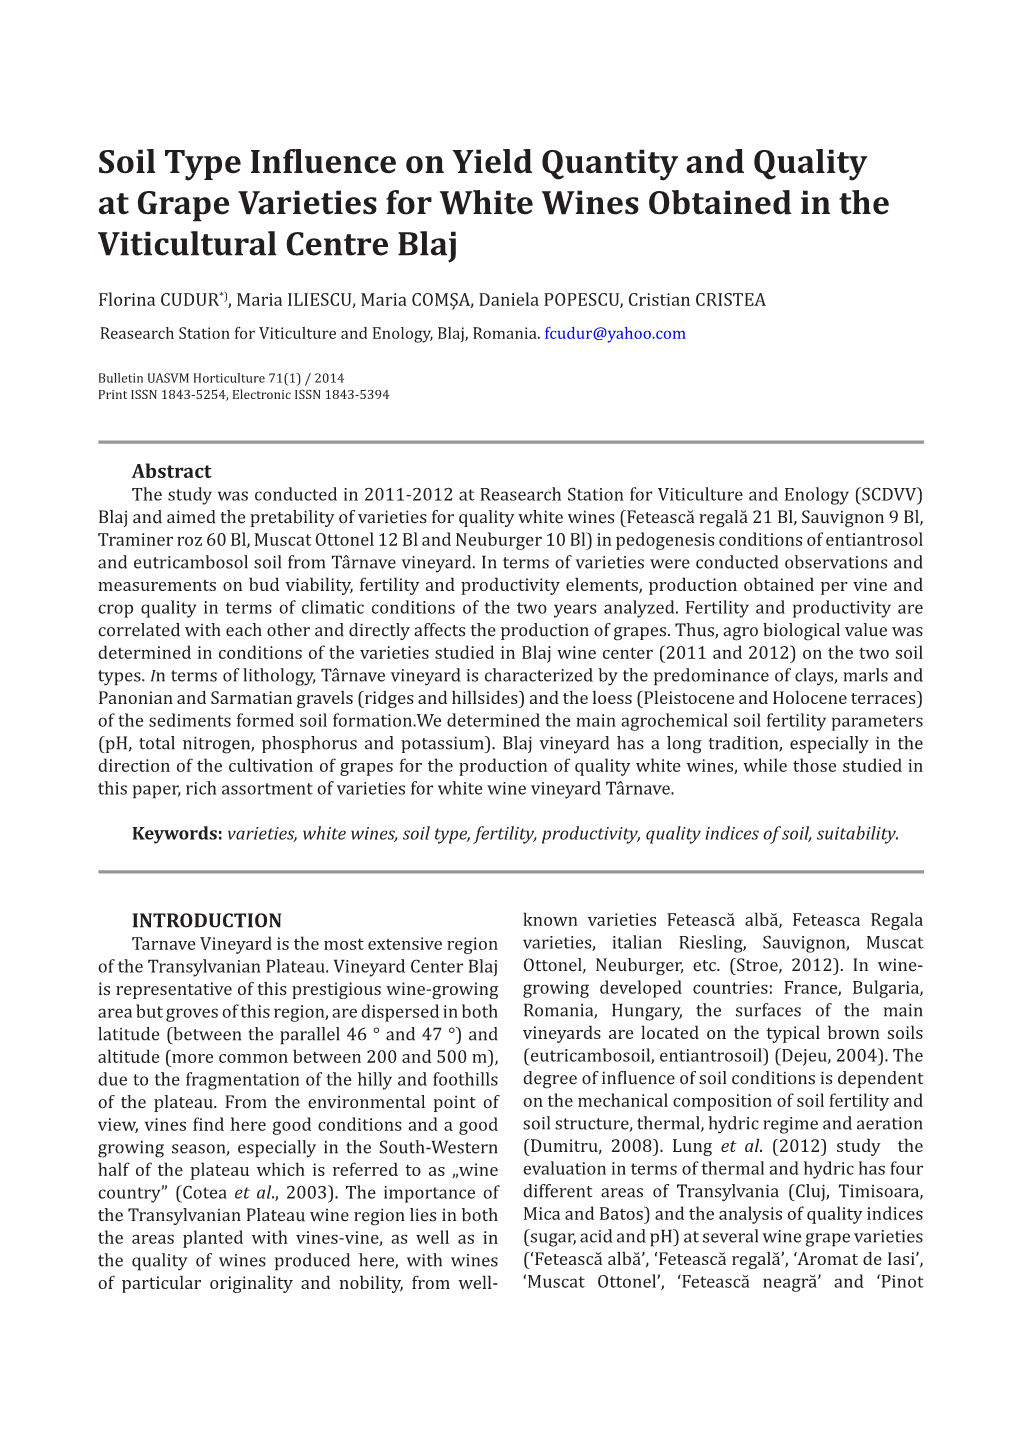 Soil Type Influence on Yield Quantity and Quality at Grape Varieties for White Wines Obtained in the Viticultural Centre Blaj